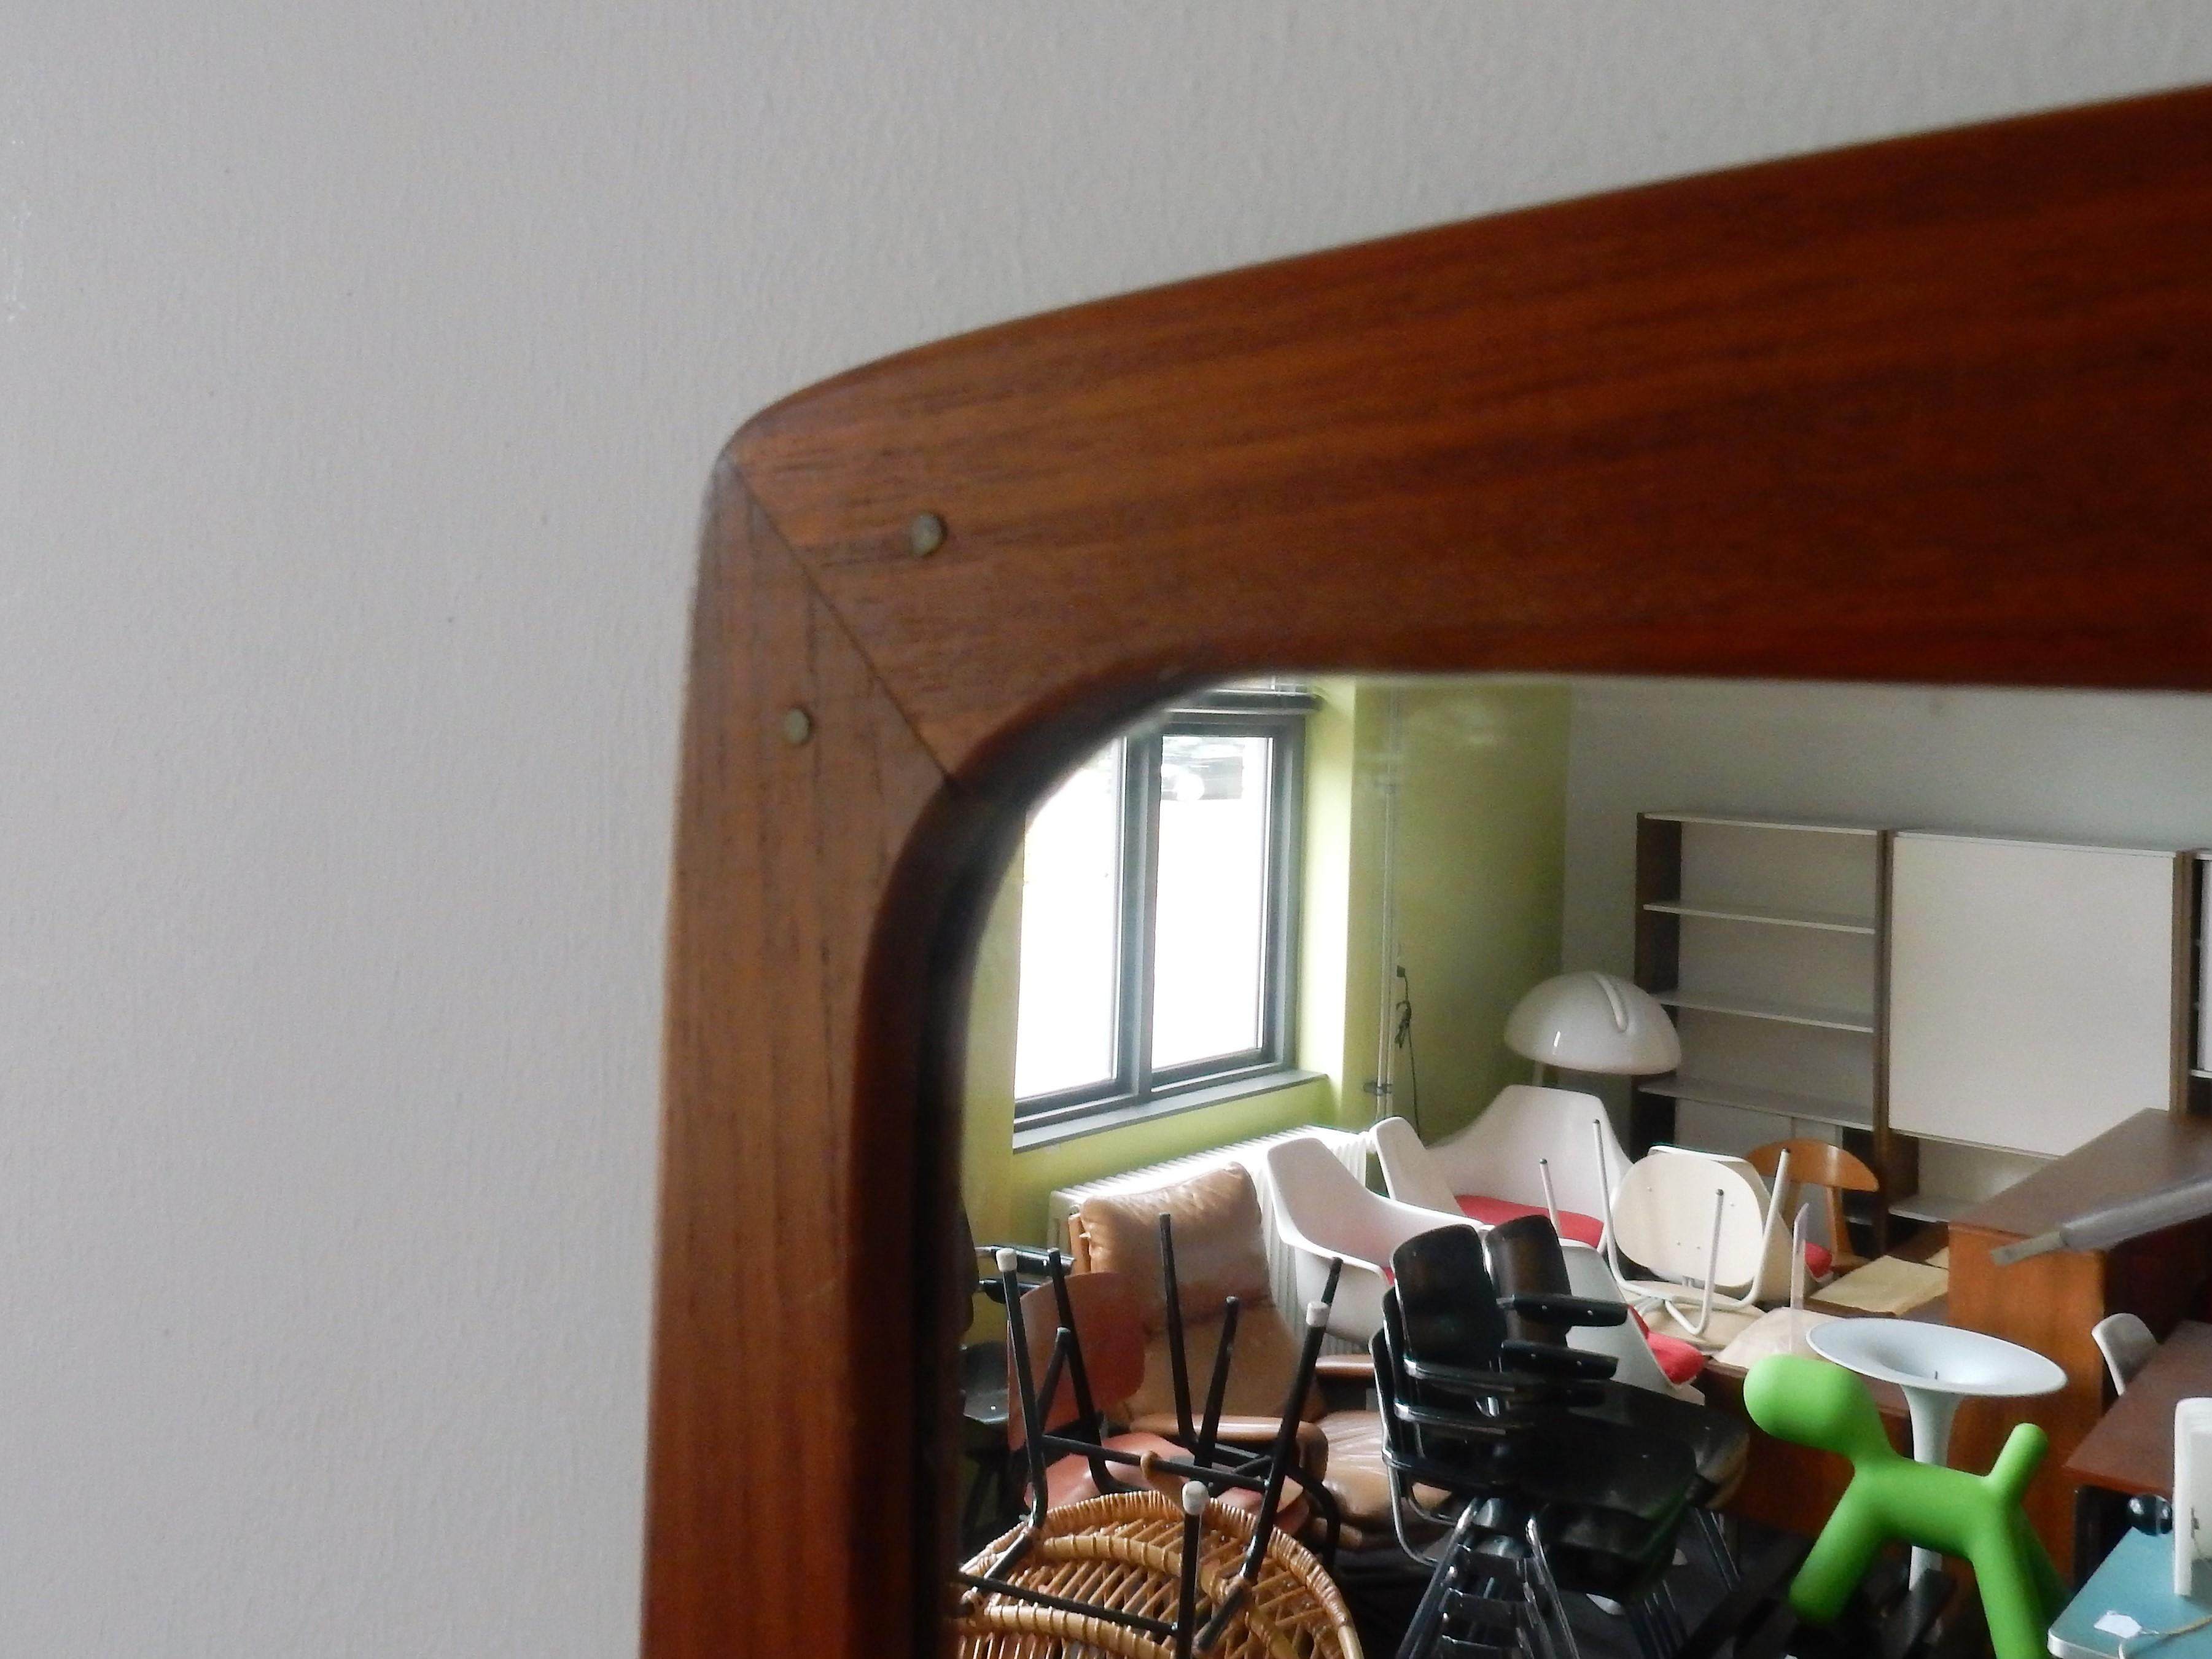 Very nice mirror in a teak frame. The rectangular frame has brass nails where the frame parts connect. This item is in a very good condition with some signs of age and use.